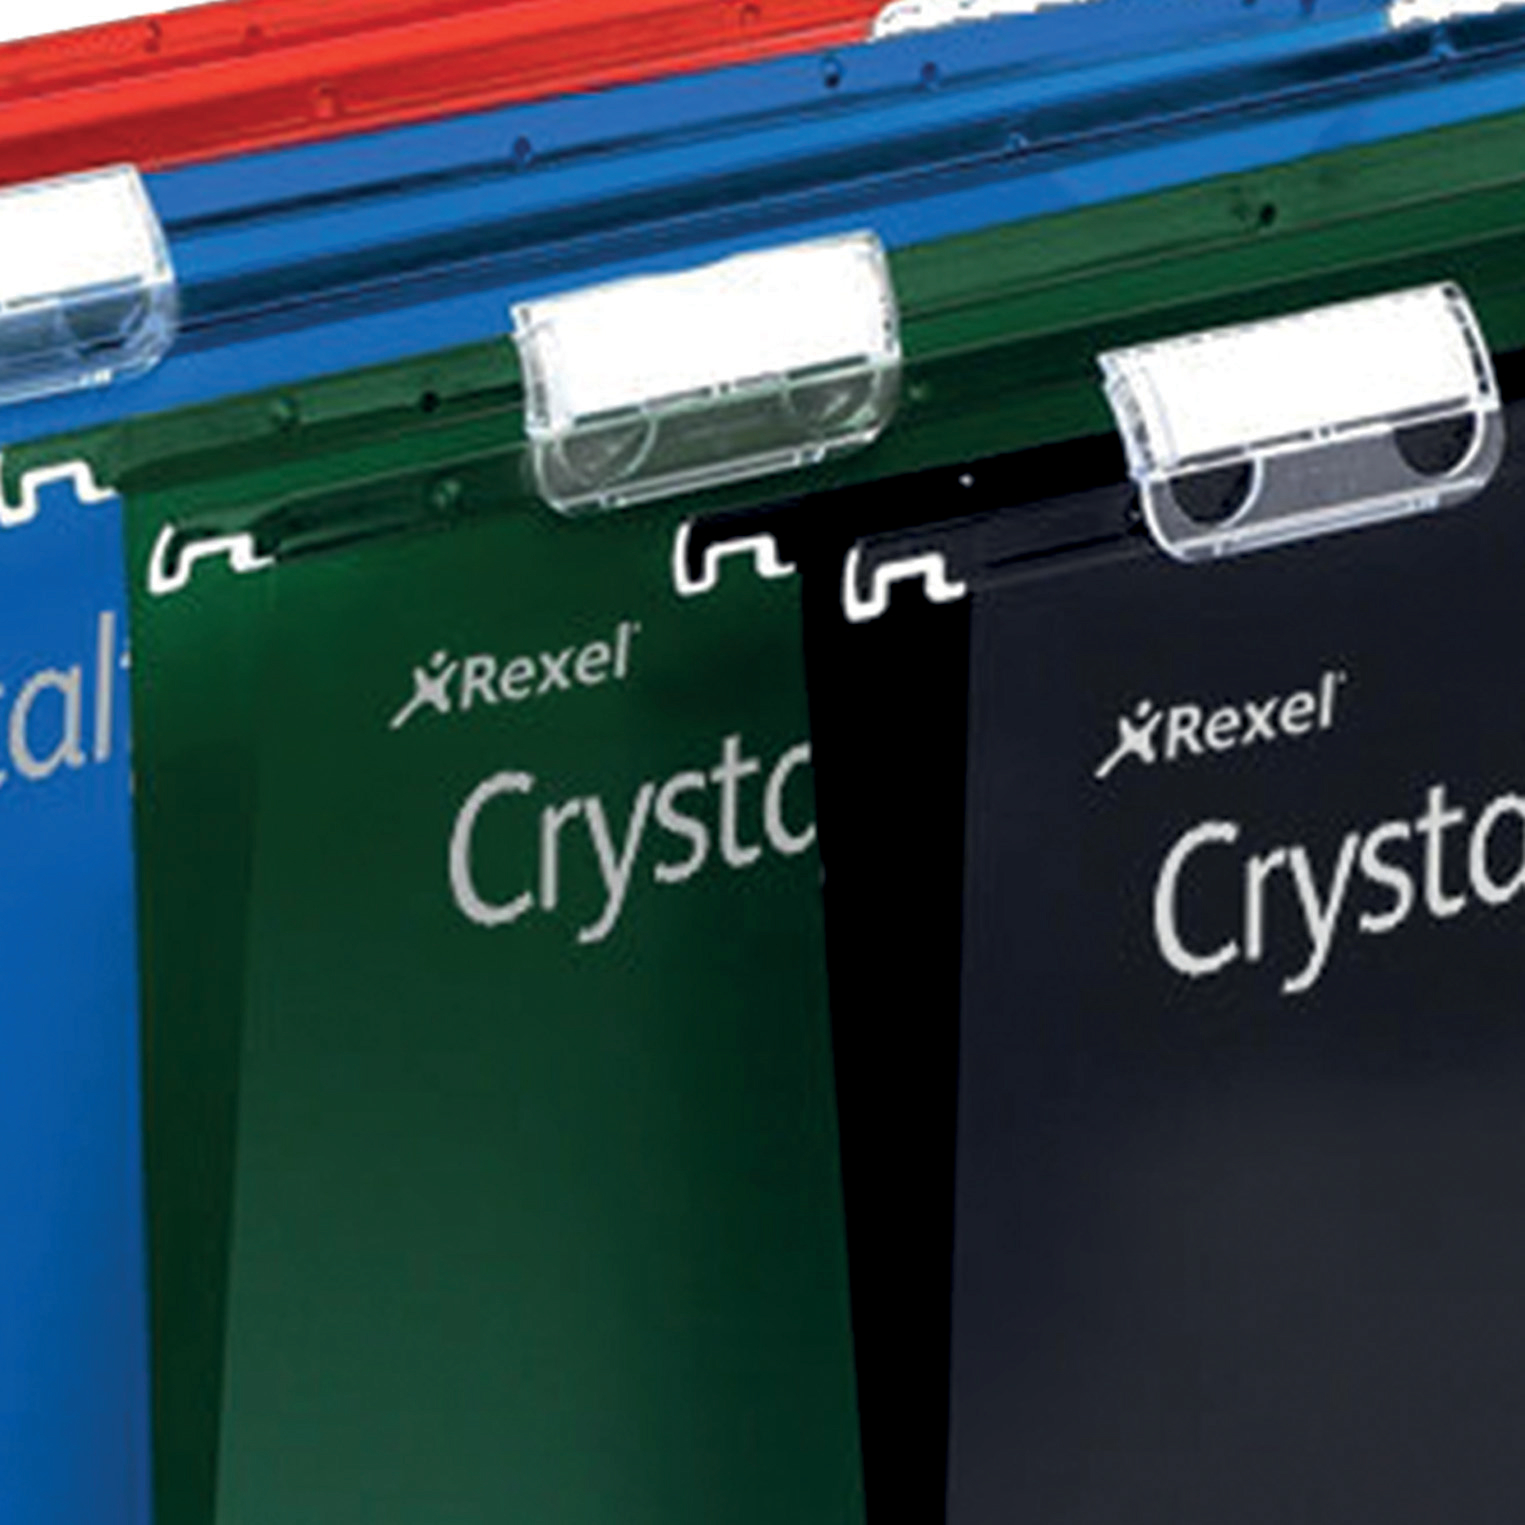 Rexel Crystalfile Extra Foolscap Suspension File Polypropylene 50mm Green (Pack 25) 3000112